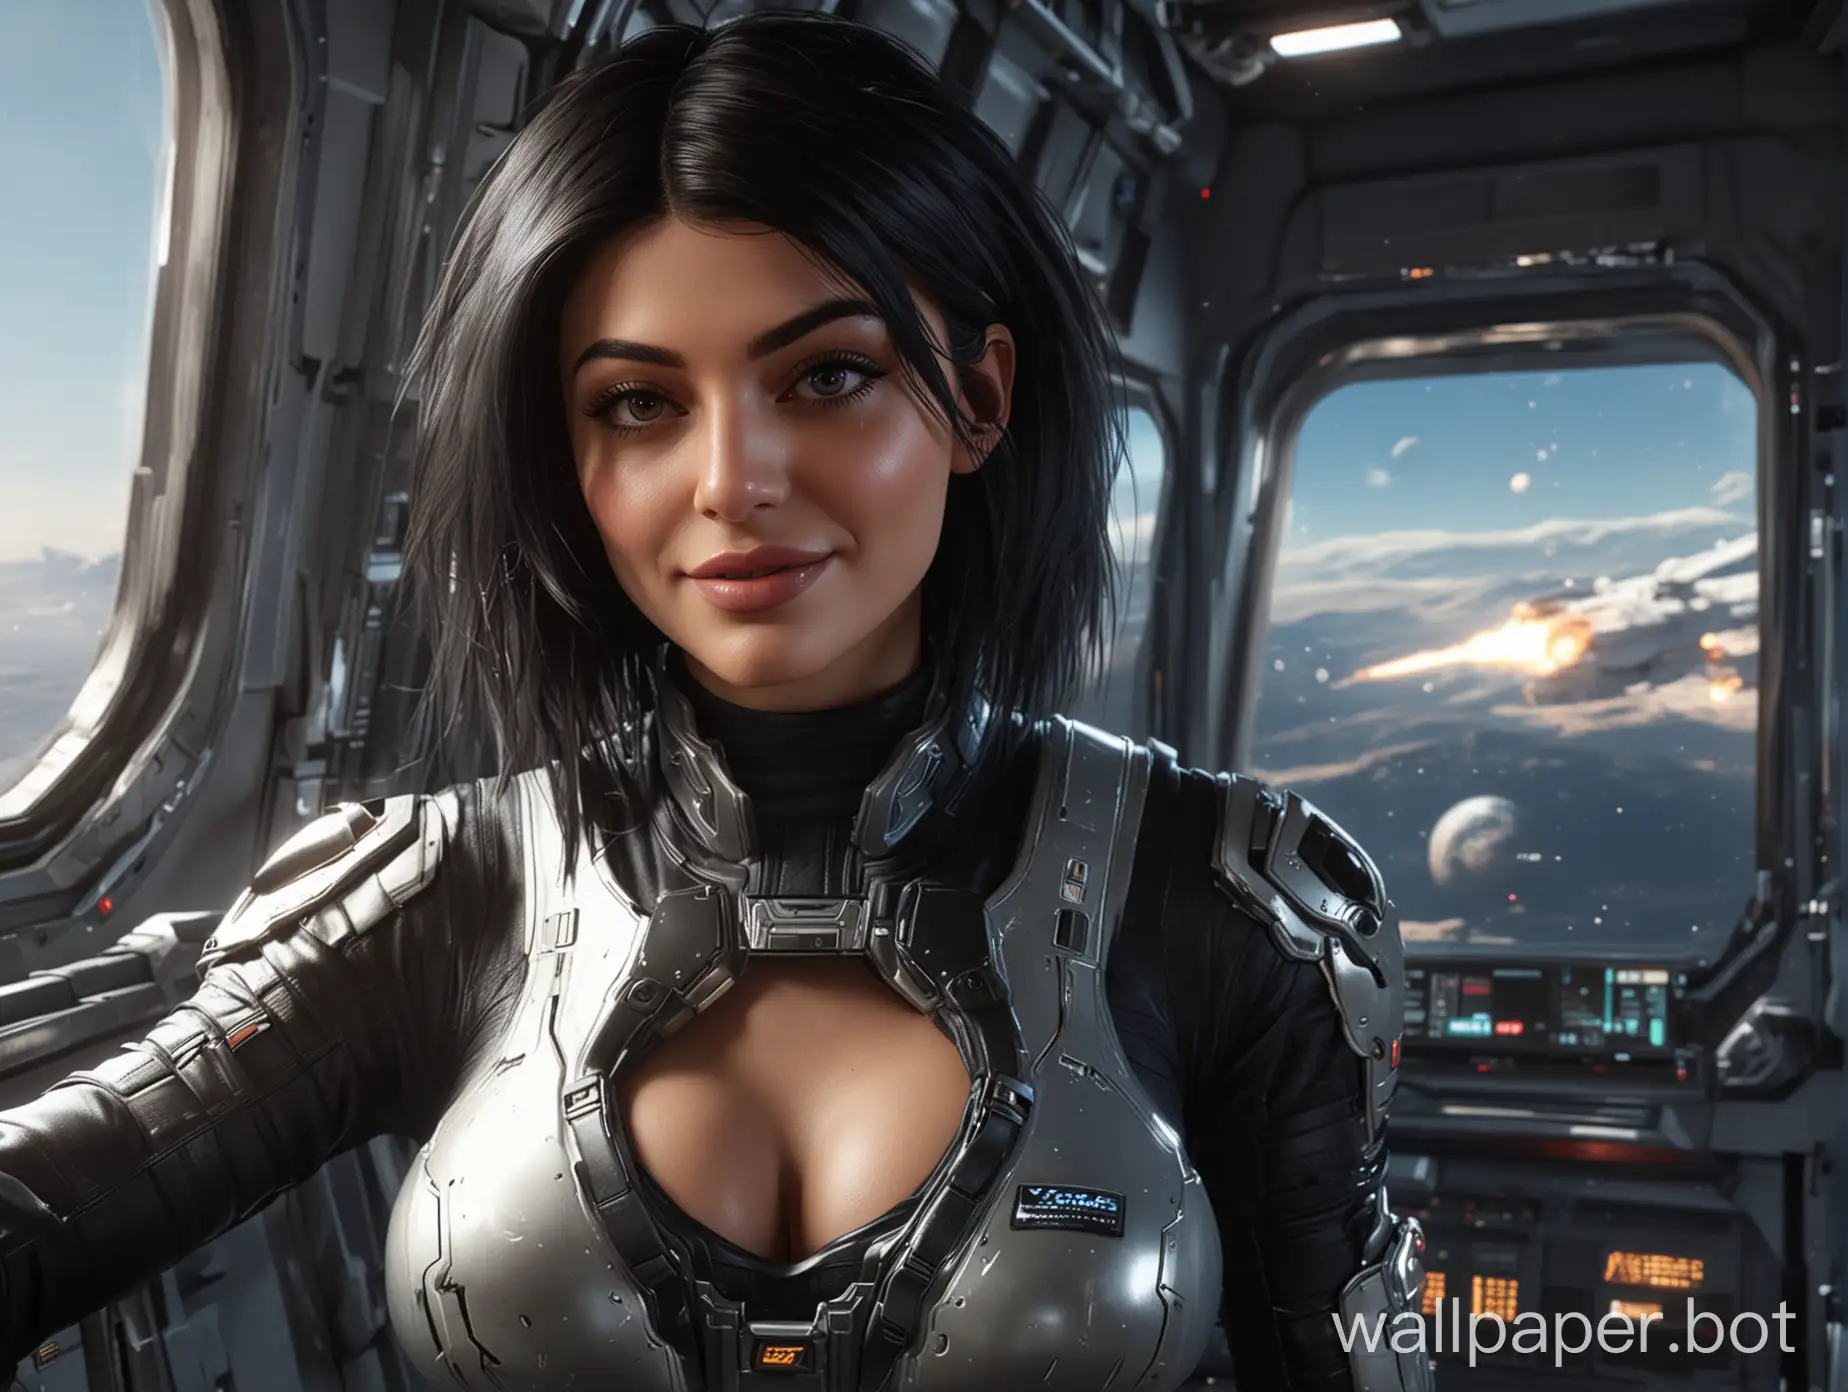 Star Citizen Videogame, female pilot with Kylie Jenner face taking selfie, Science-Fiction, close-up headshot, Wear sporty cyberoutfit with cleavage, curvy female body shape, stars and planet through a window in the background, black shoulder long hair, natural black eyes, open smiling with showing teeth, over-the-shoulder shot